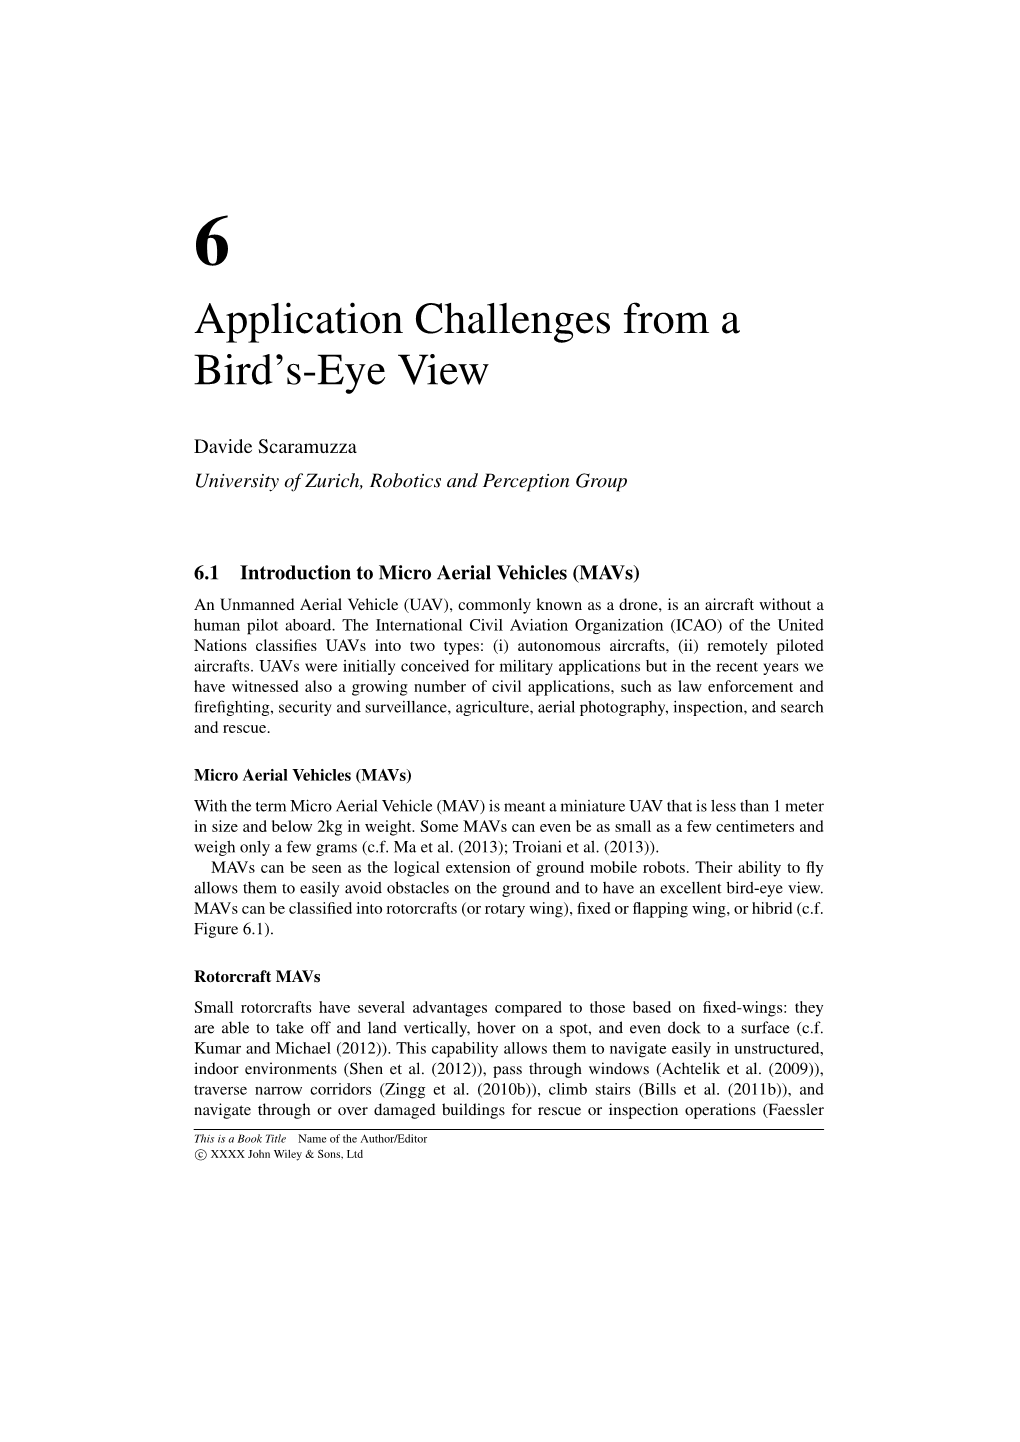 Application Challenges from a Bird's-Eye View